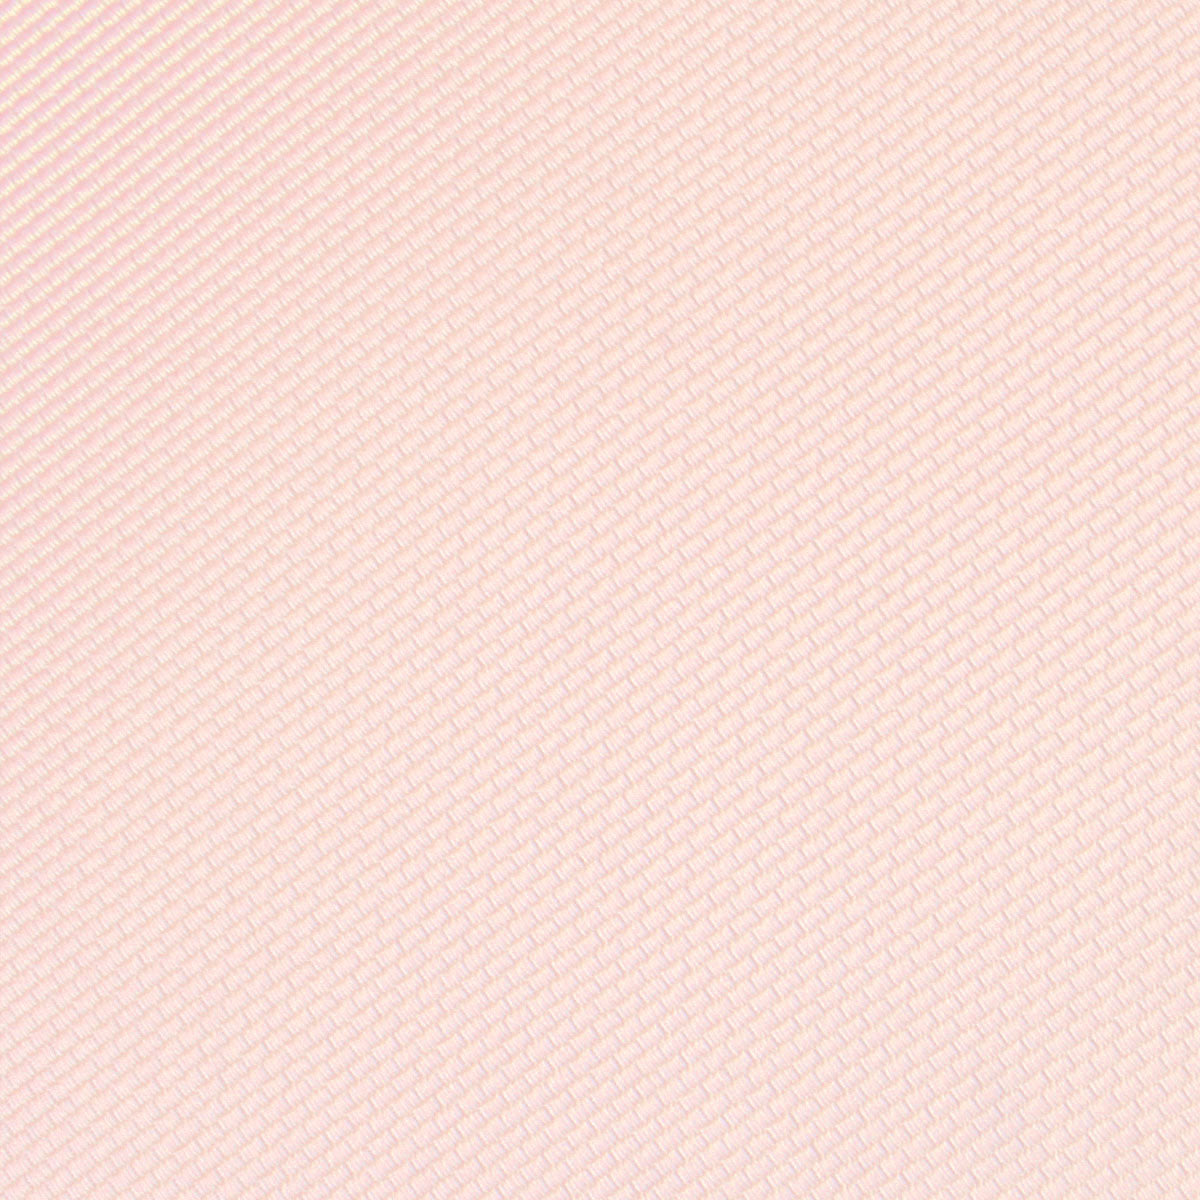 Misty Rose Pink Weave Kids Bow Tie Fabric